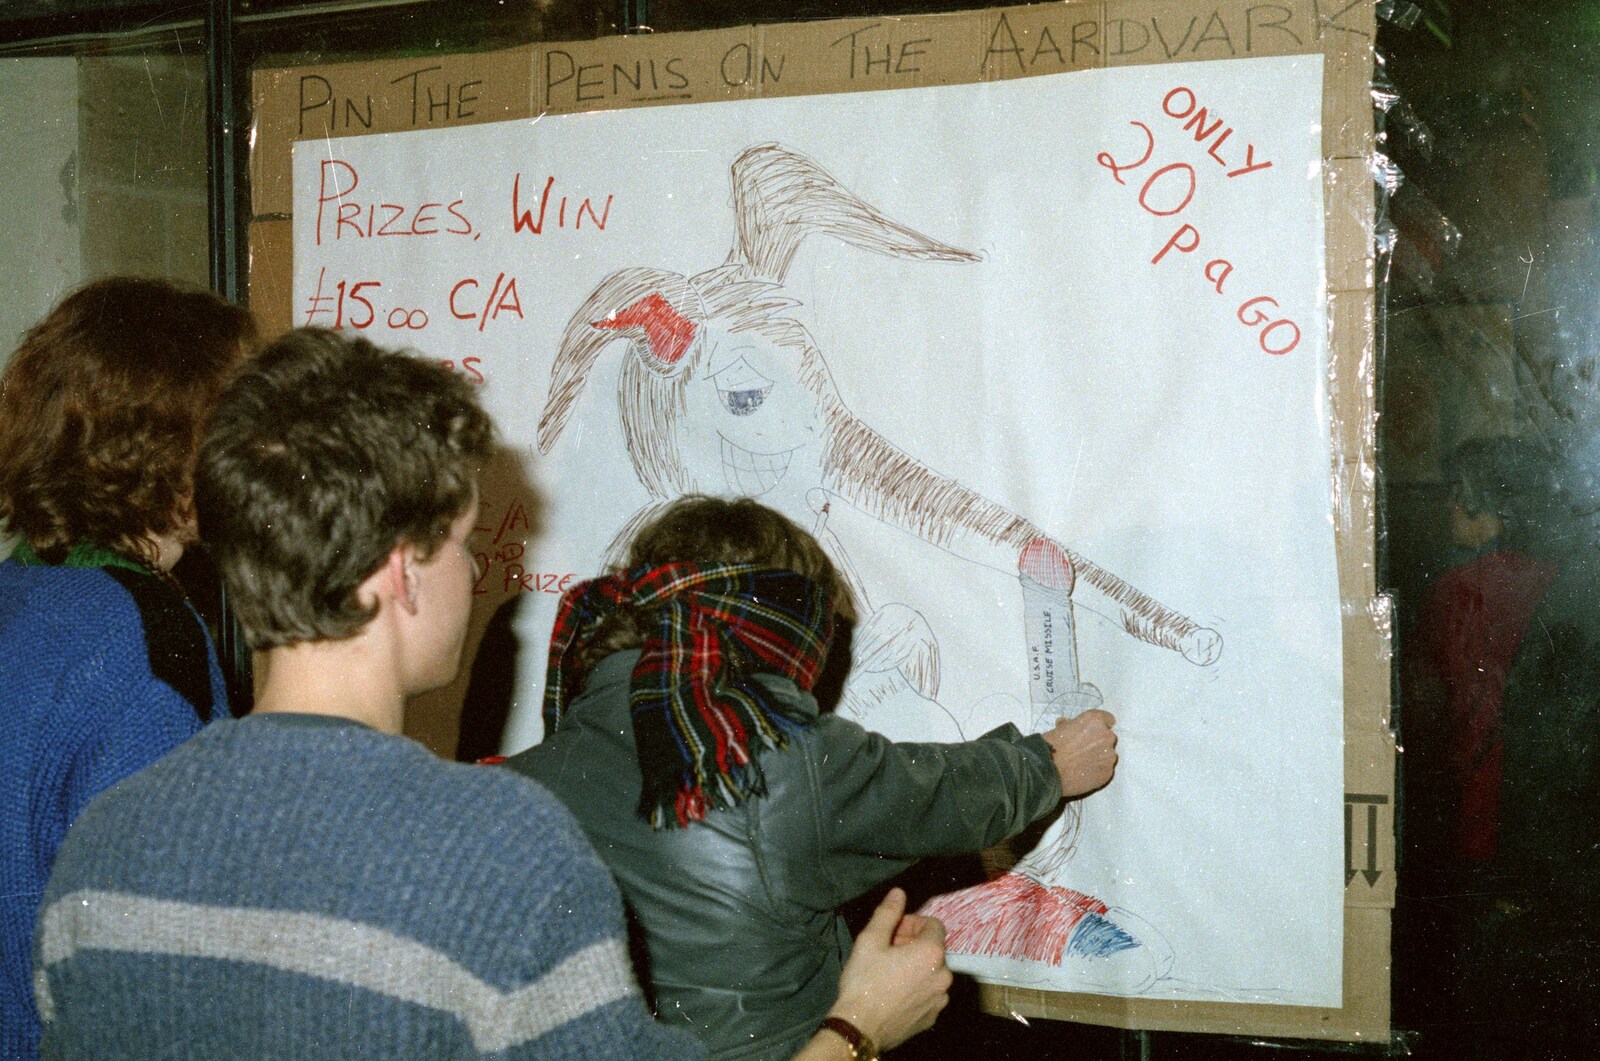 A 'pin the penis on the aadvark' game from Uni: Pirate RAG Bash, Games Nights and Brian's Beard, PPSU, Plymouth - 10th February 1987